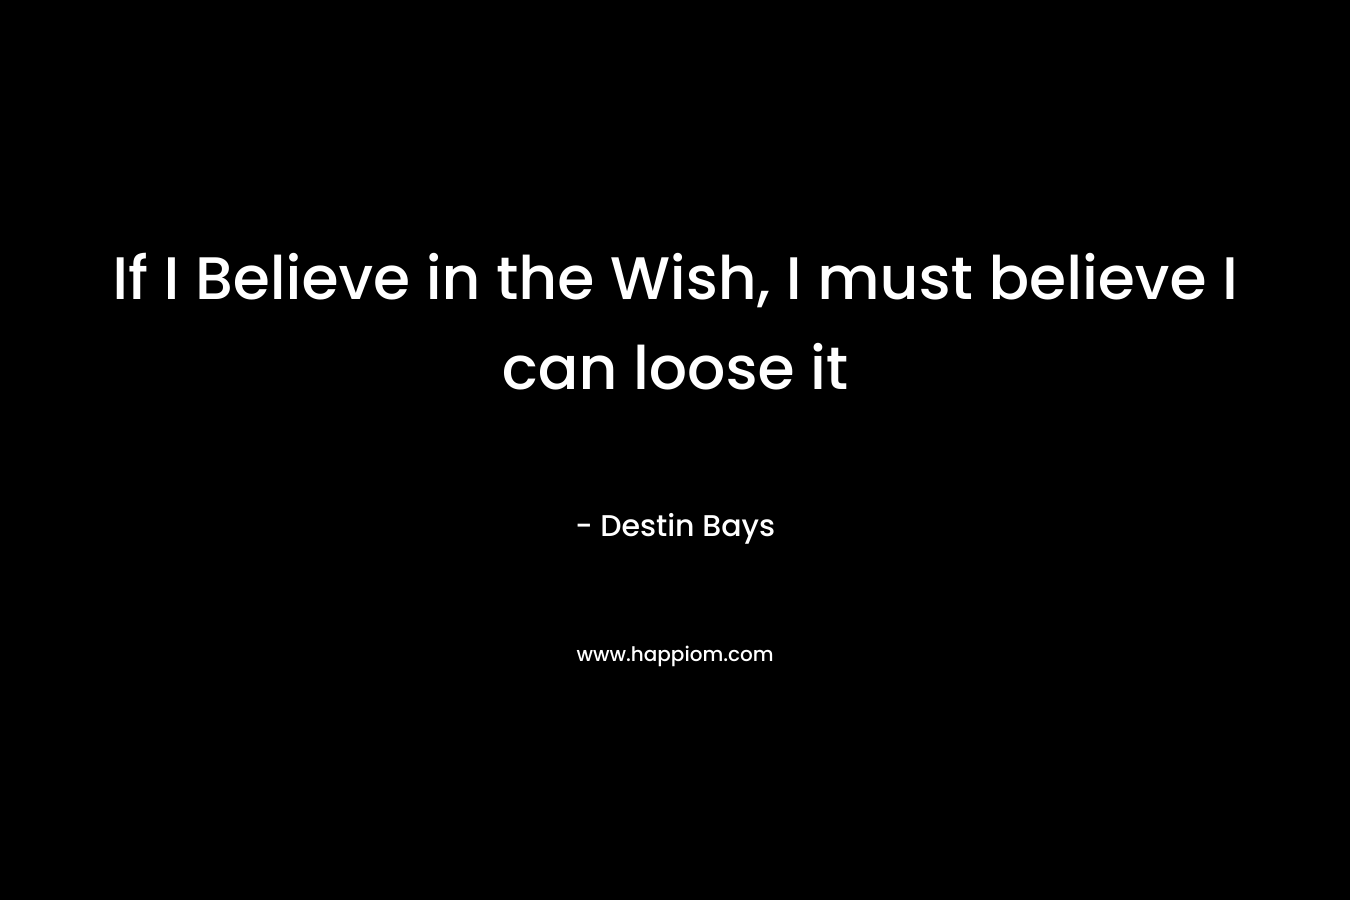 If I Believe in the Wish, I must believe I can loose it – Destin Bays